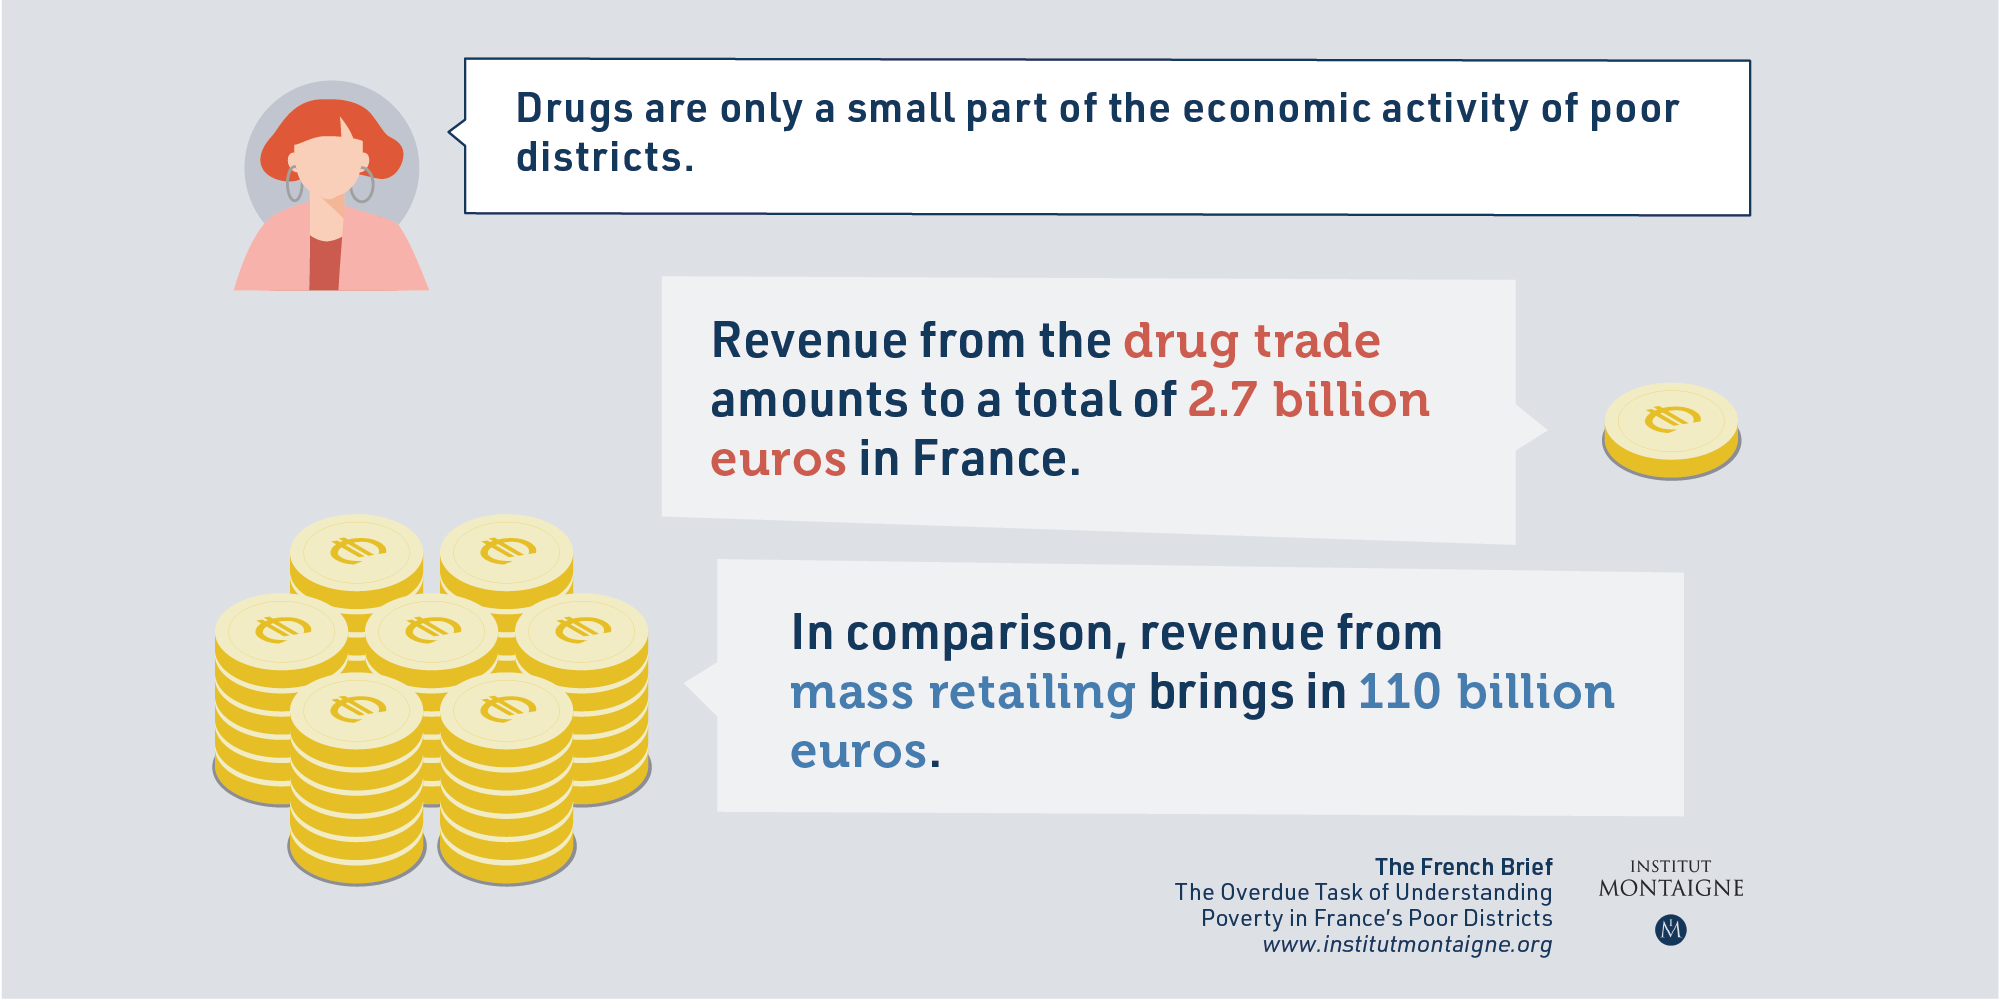 Drugs are only a small part of the economic activity of poor districts.